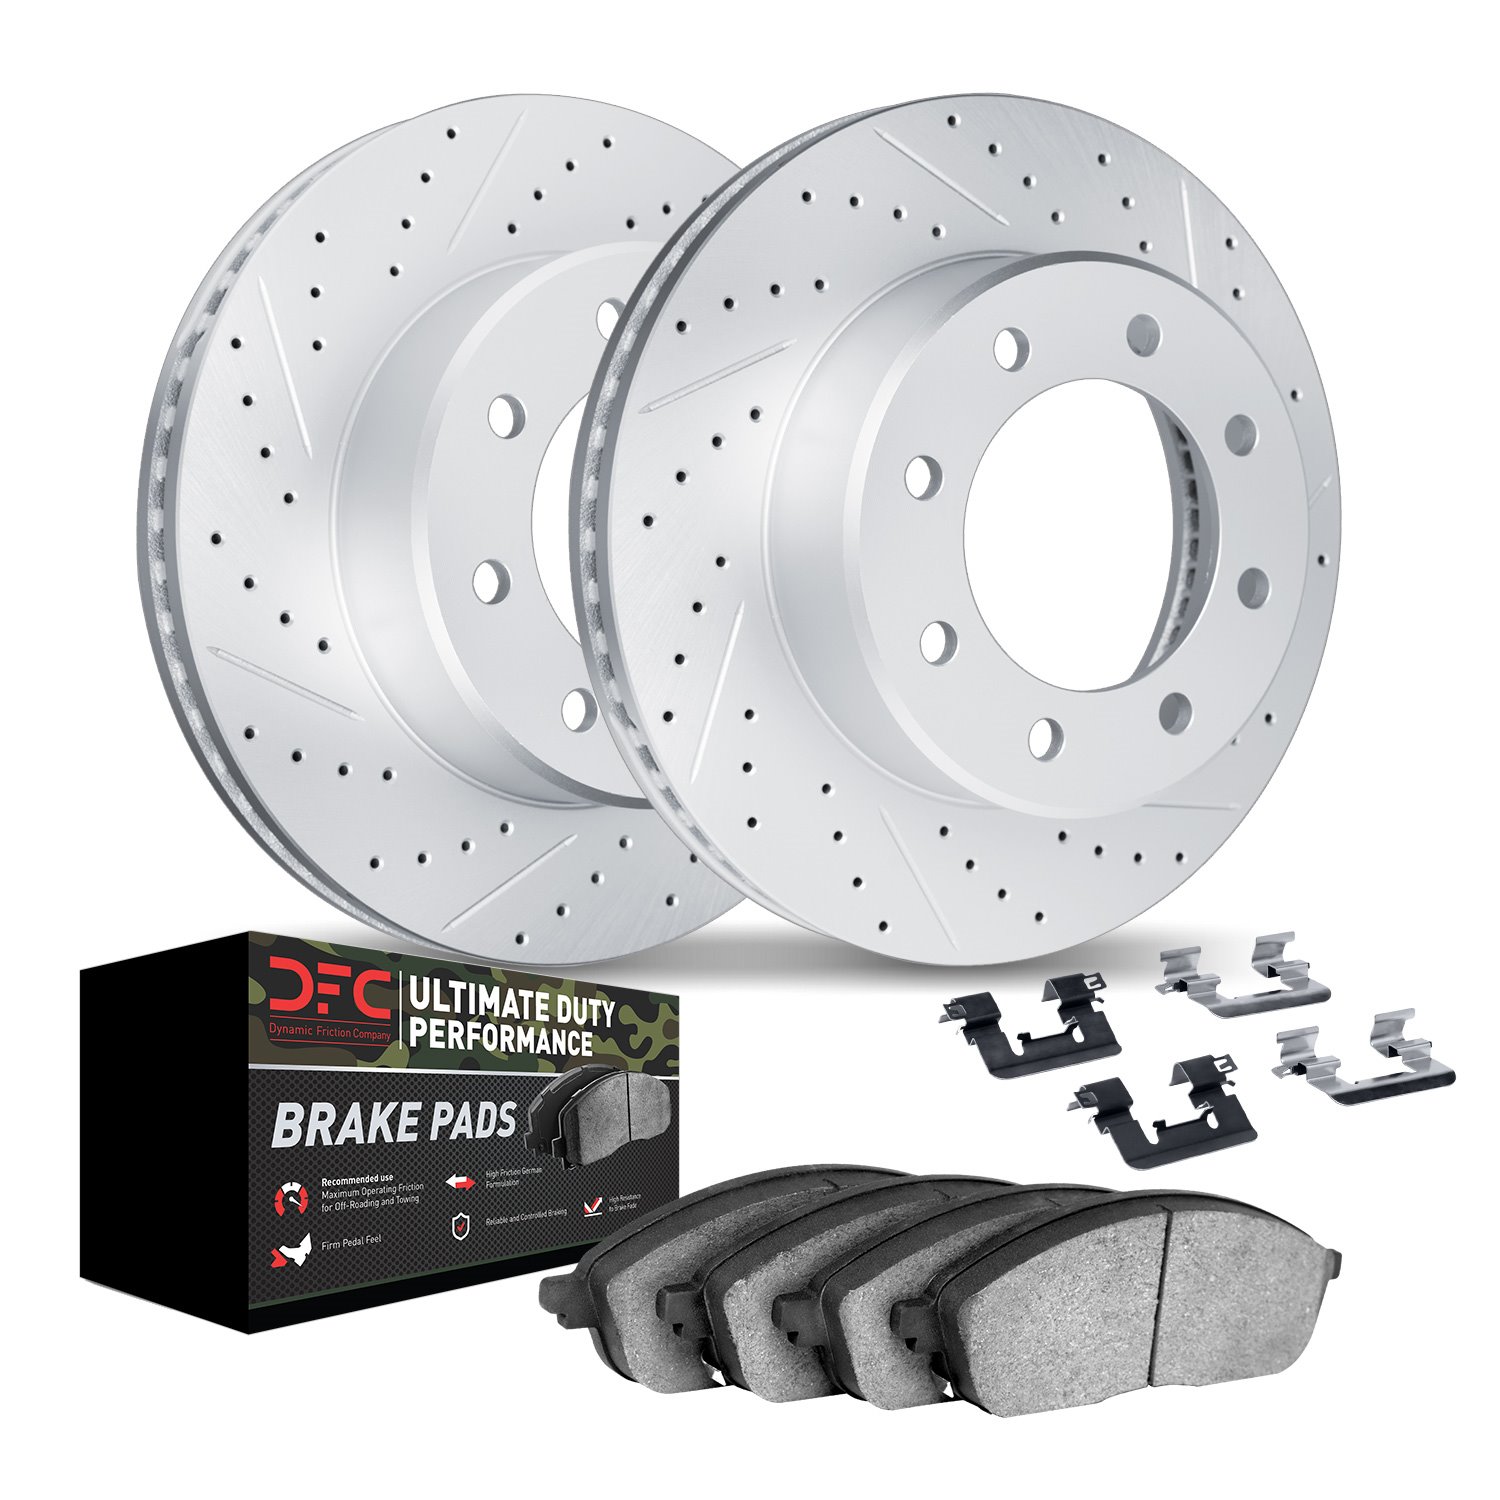 2412-48020 Geoperformance Drilled/Slotted Brake Rotors with Ultimate-Duty Brake Pads Kit & Hardware, 2001-2010 GM, Position: Rea